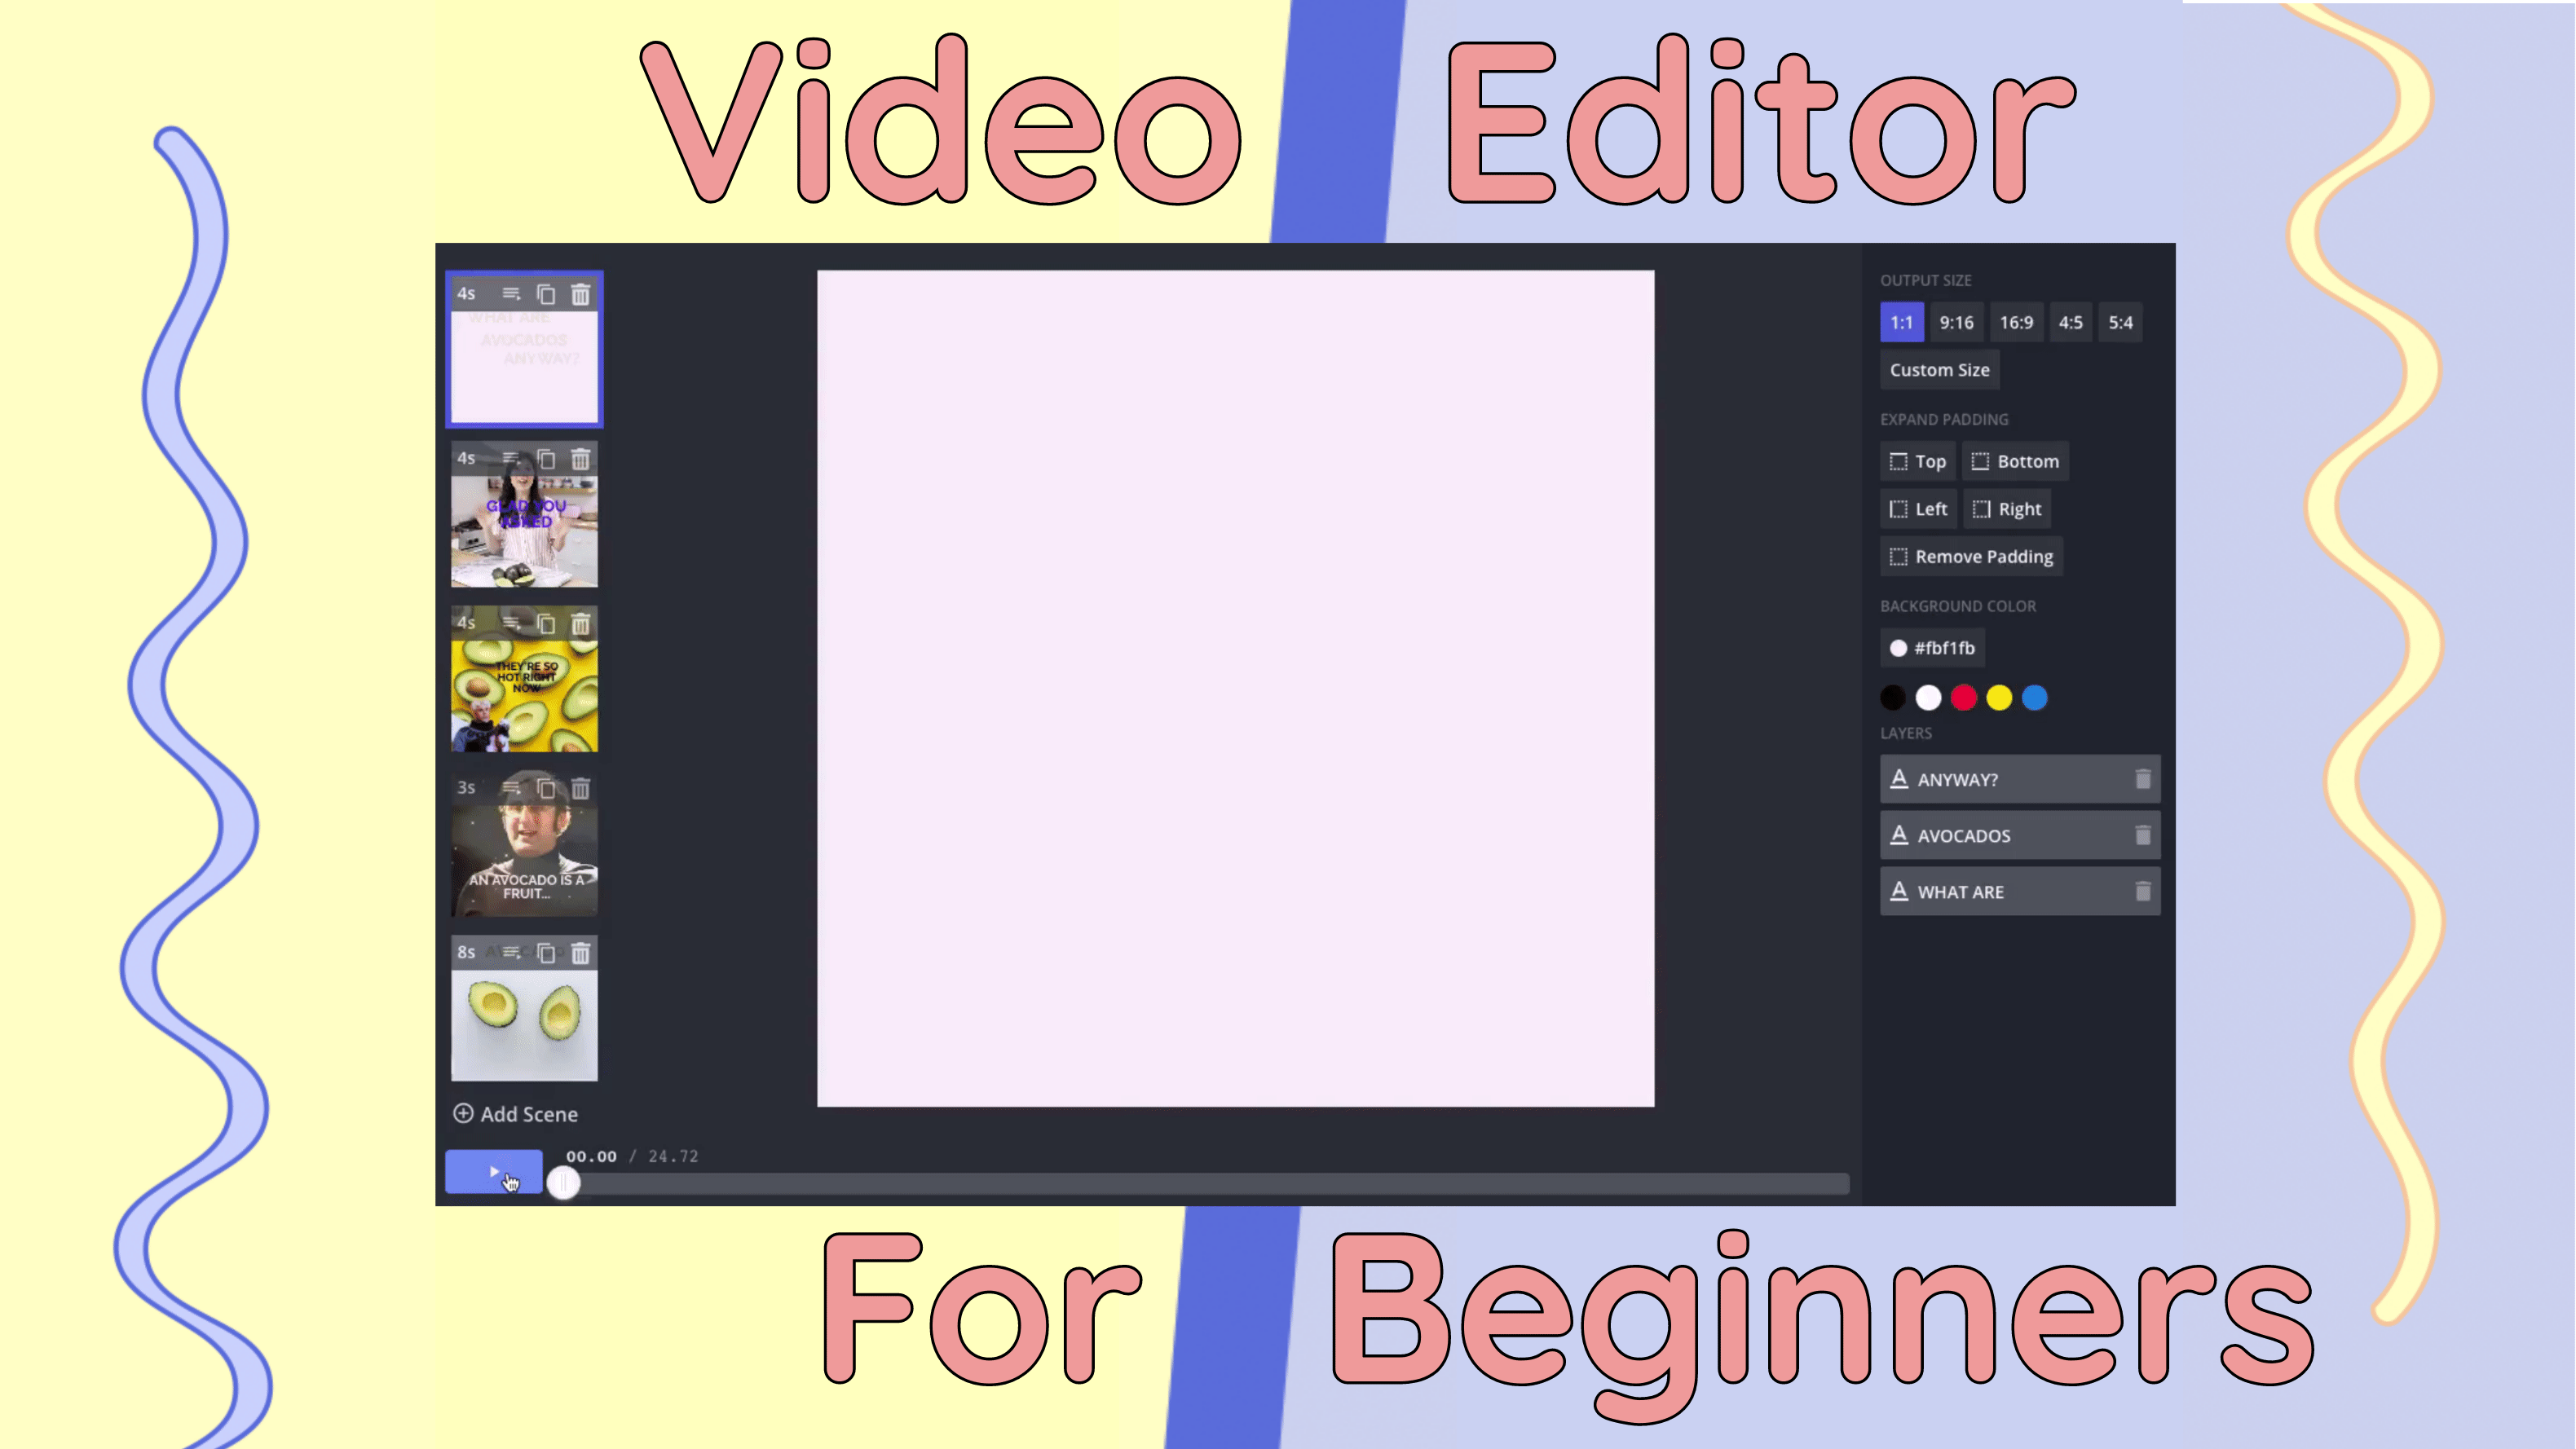 The Best Simple Video Editor for Beginners